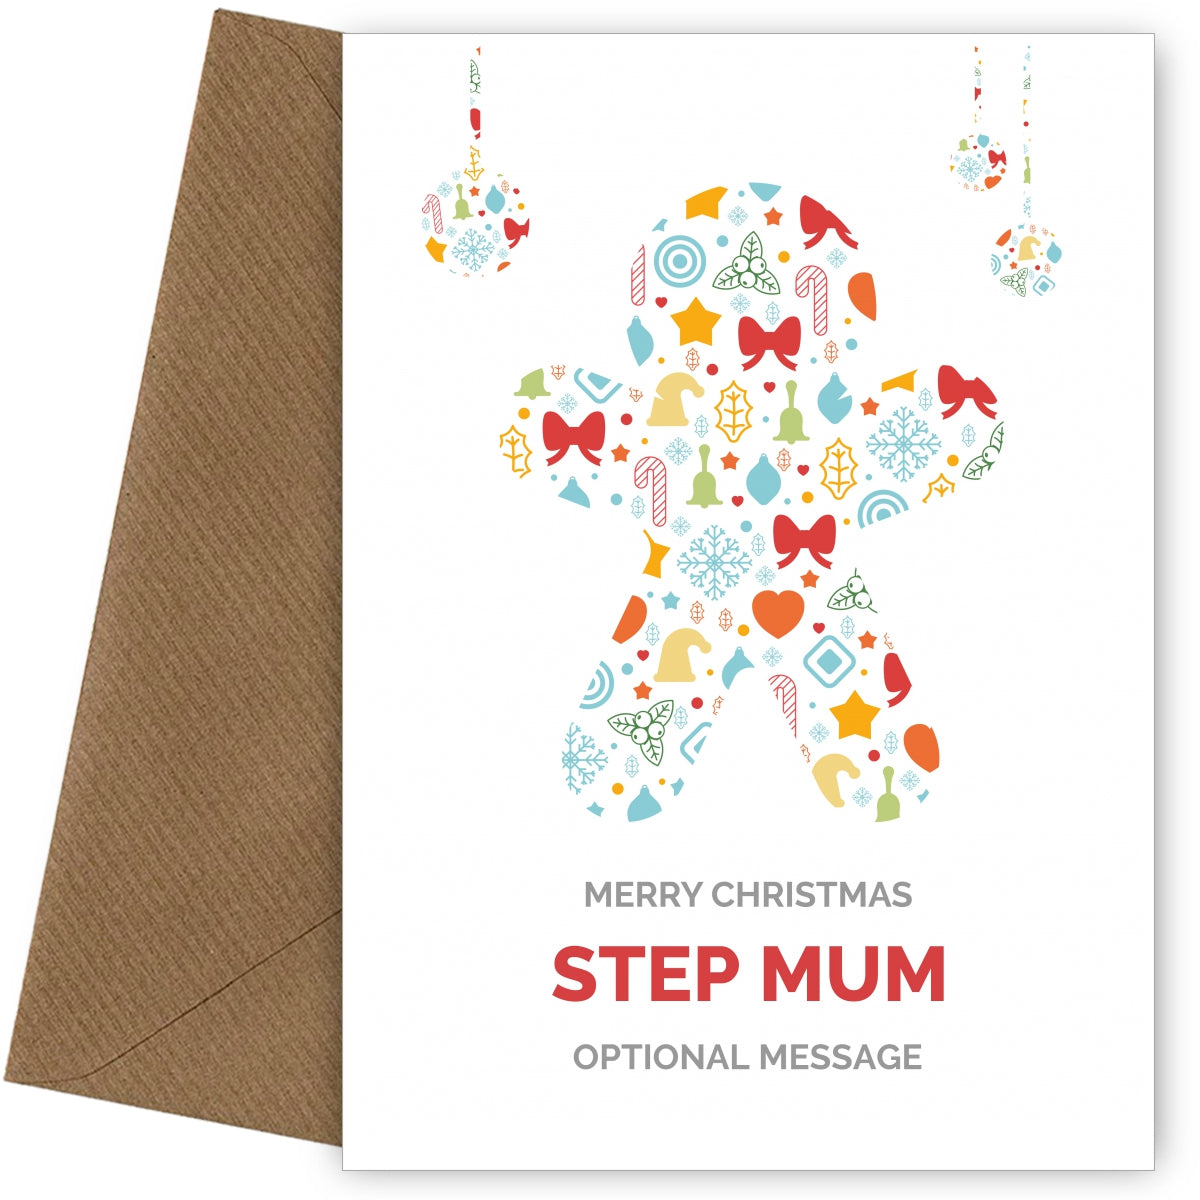 Merry Christmas Card for Step Mum - Gingerbread Man Icons